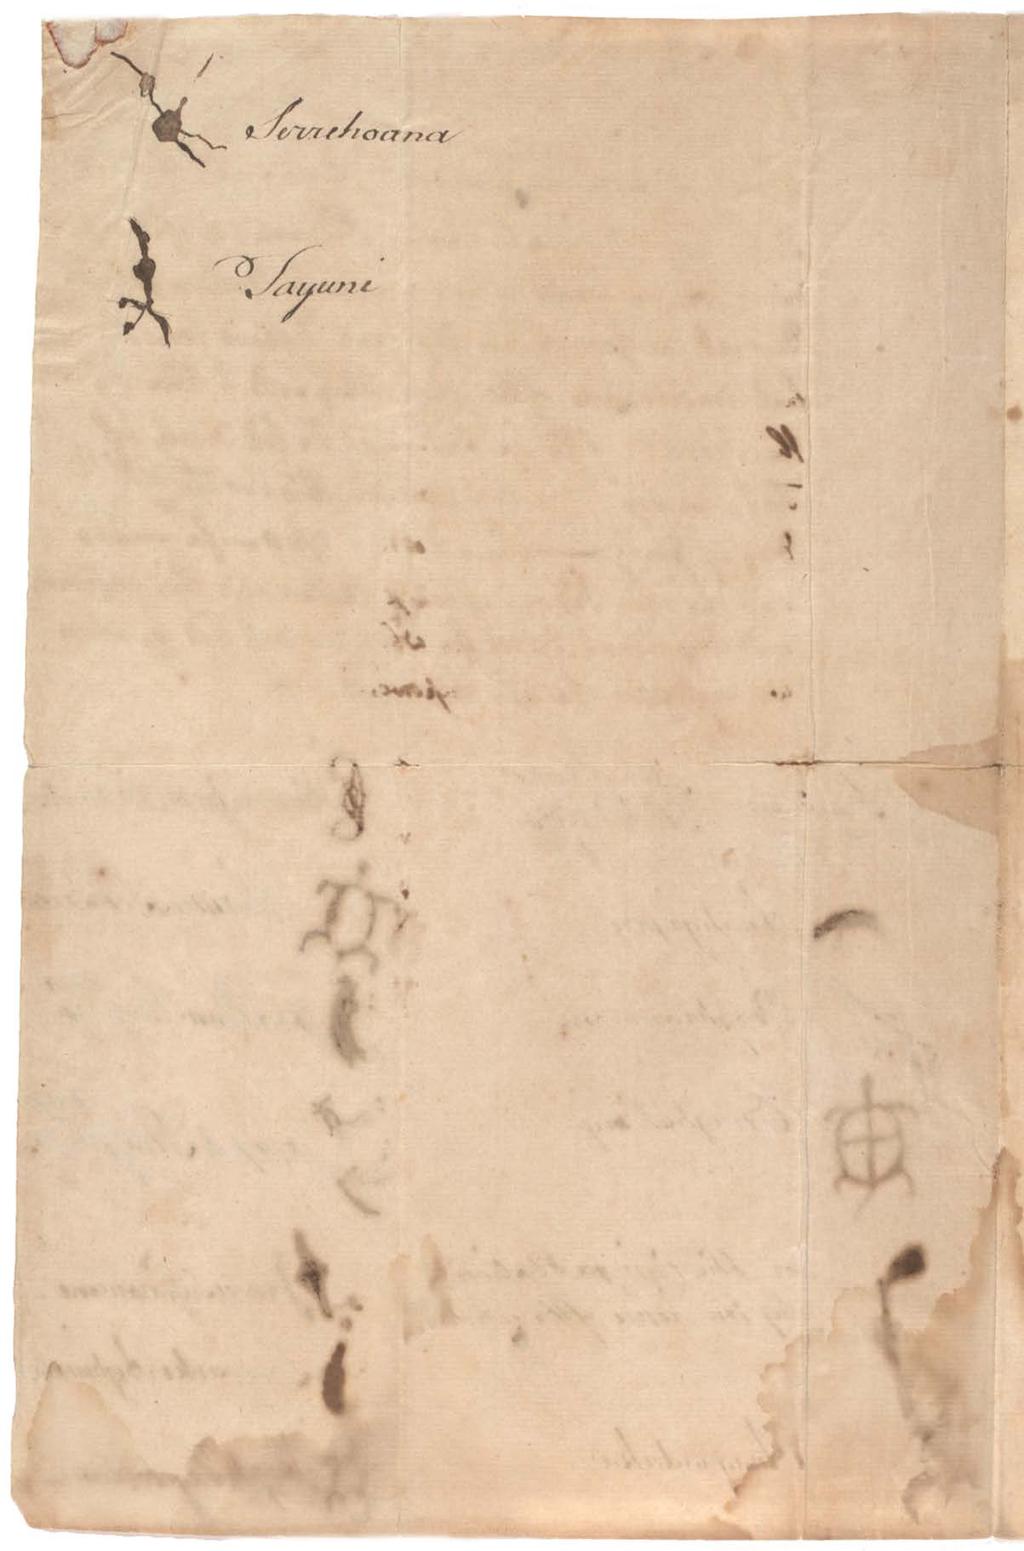 4 A receipt for land purchased from the Six Nations by